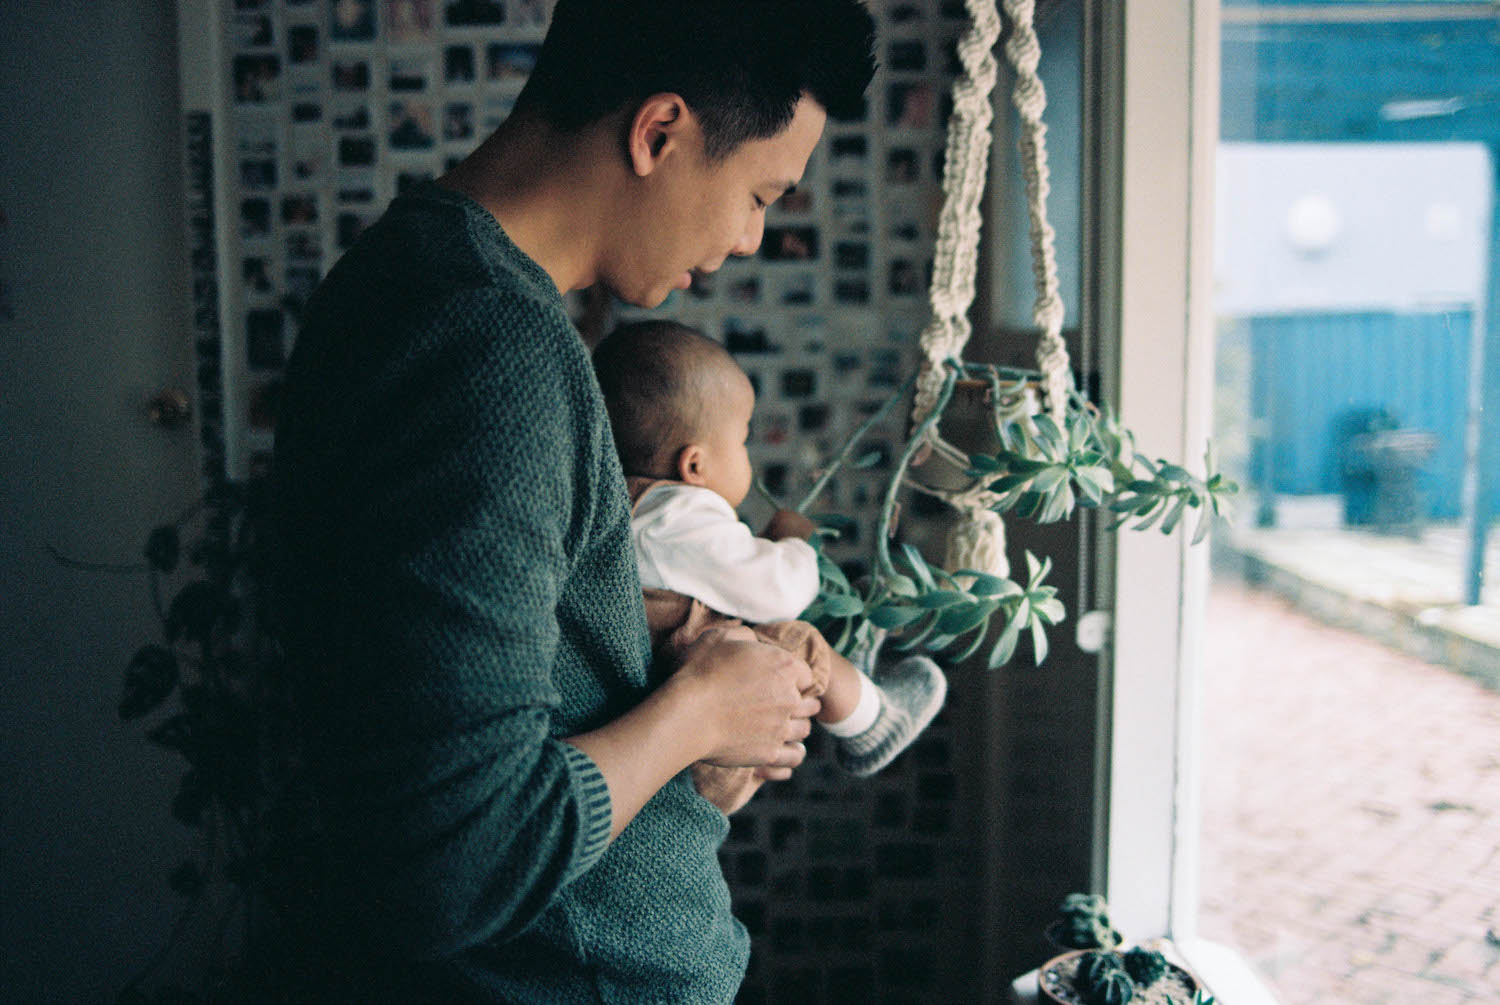 A 35mm photograph of baby Alexa & her dad Jinn at their home in Western Australia.